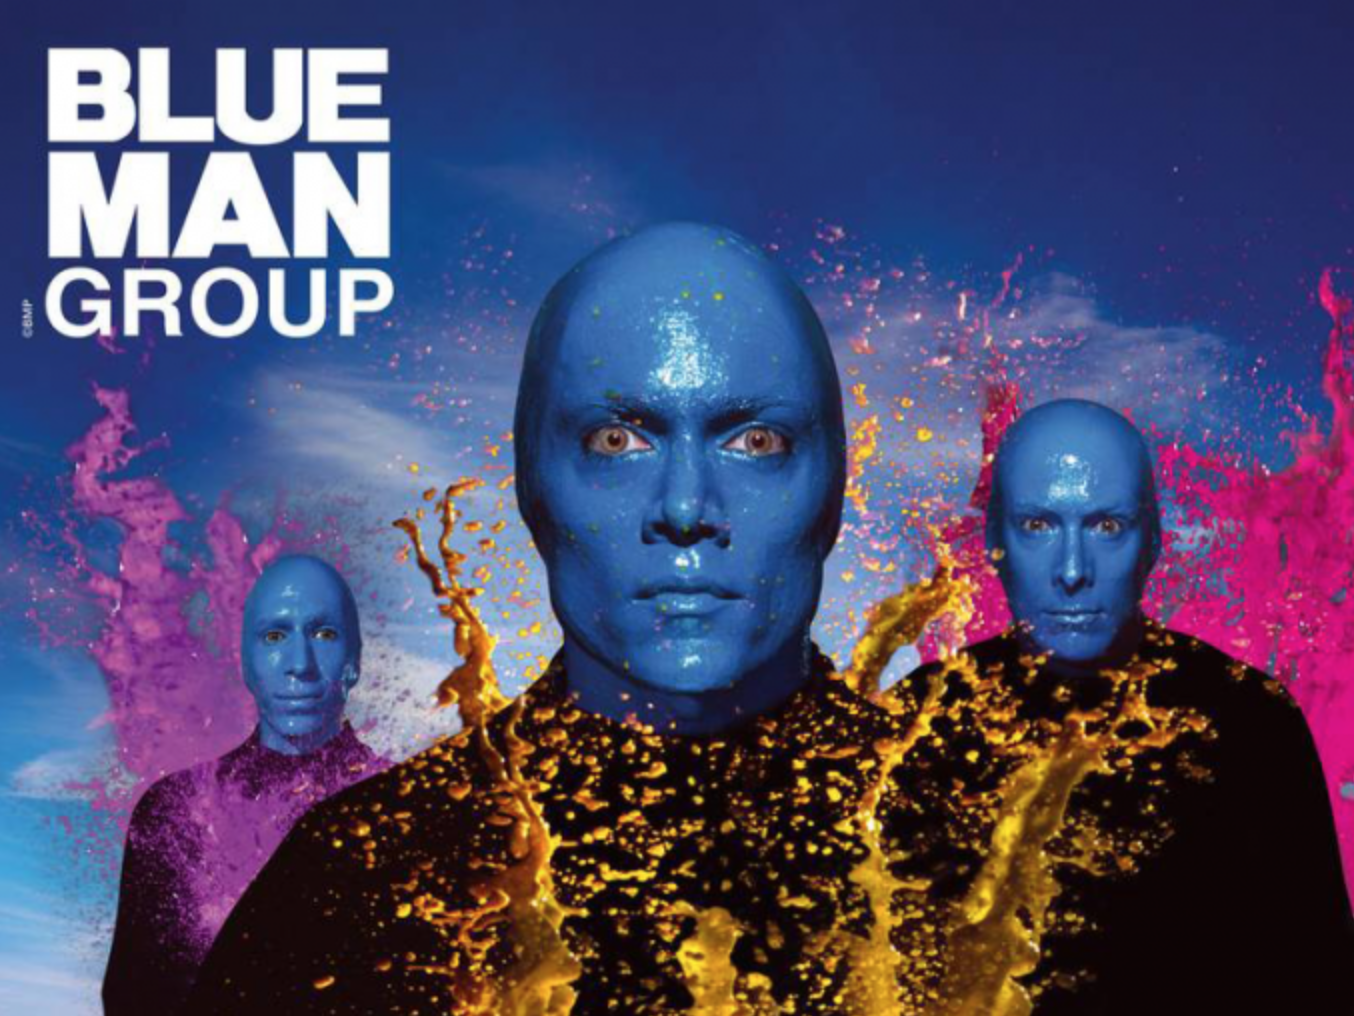 Blue Man Group at Providence Performing Arts Center